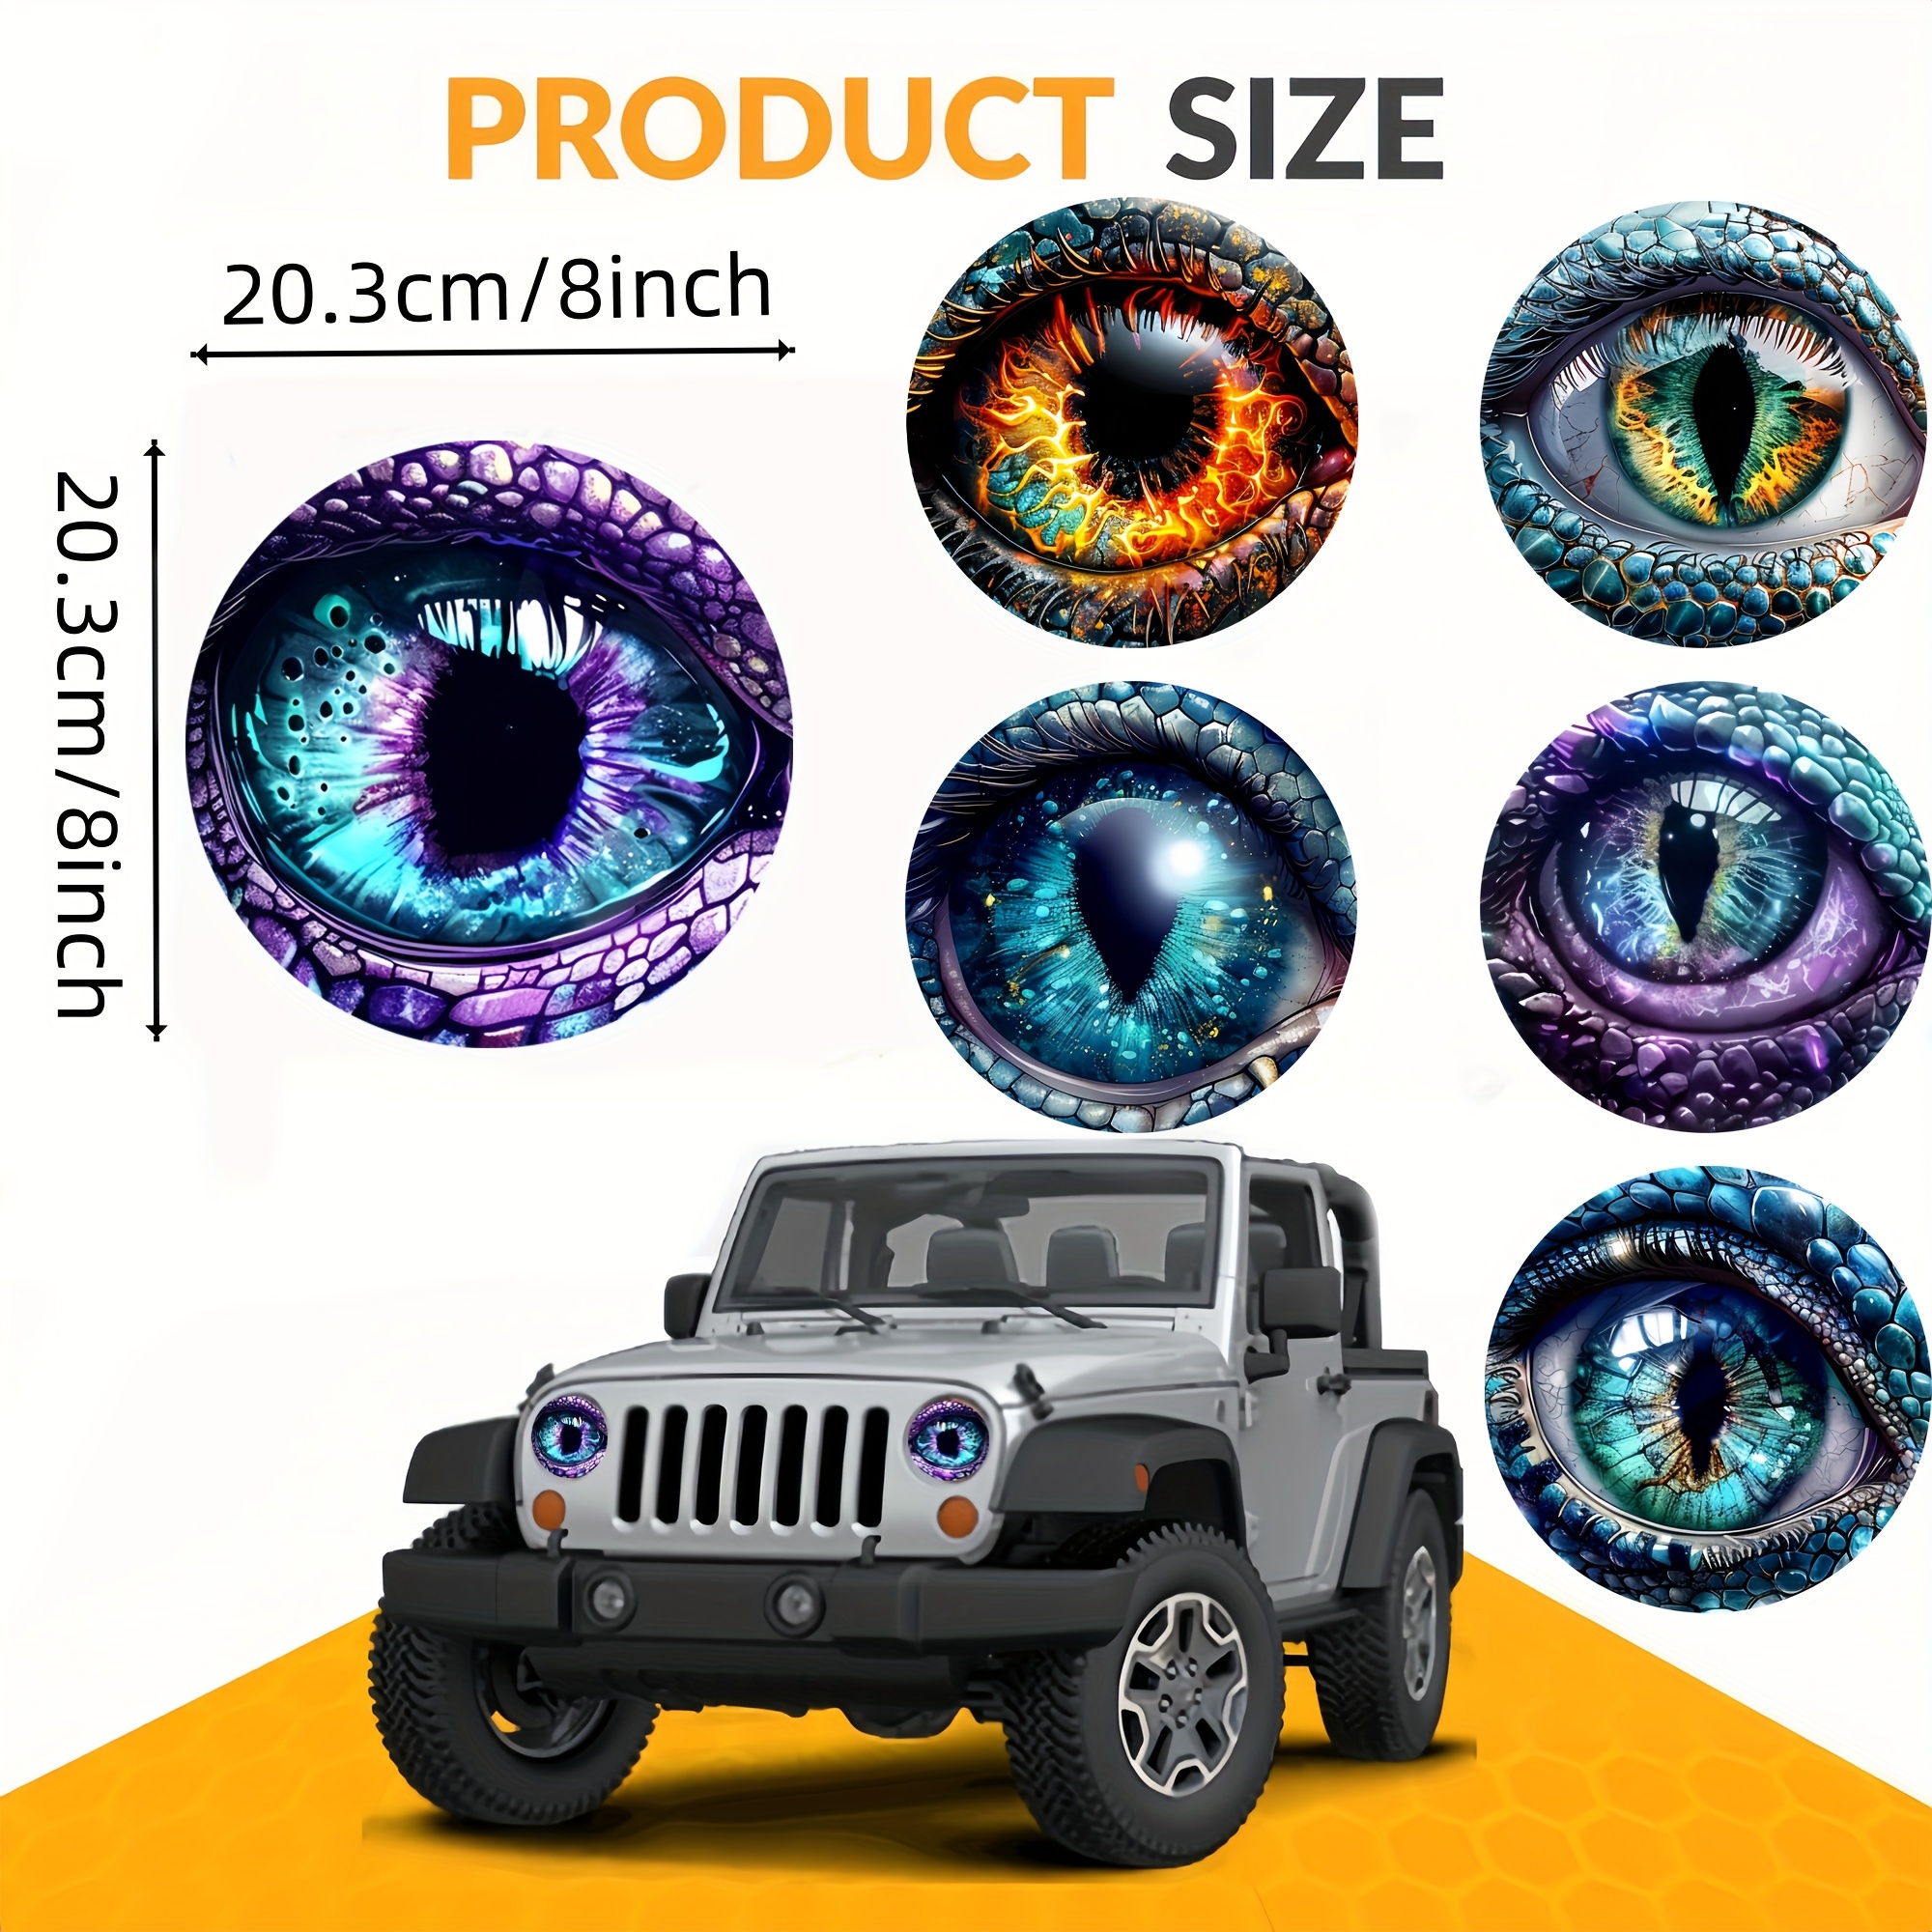 

3d Stereo Eyes Headlight Decals, Round Eye Decals For Jeep Headlights, Funny Car And Truck Body Window Bumper Decoration Stickers (a Pair)